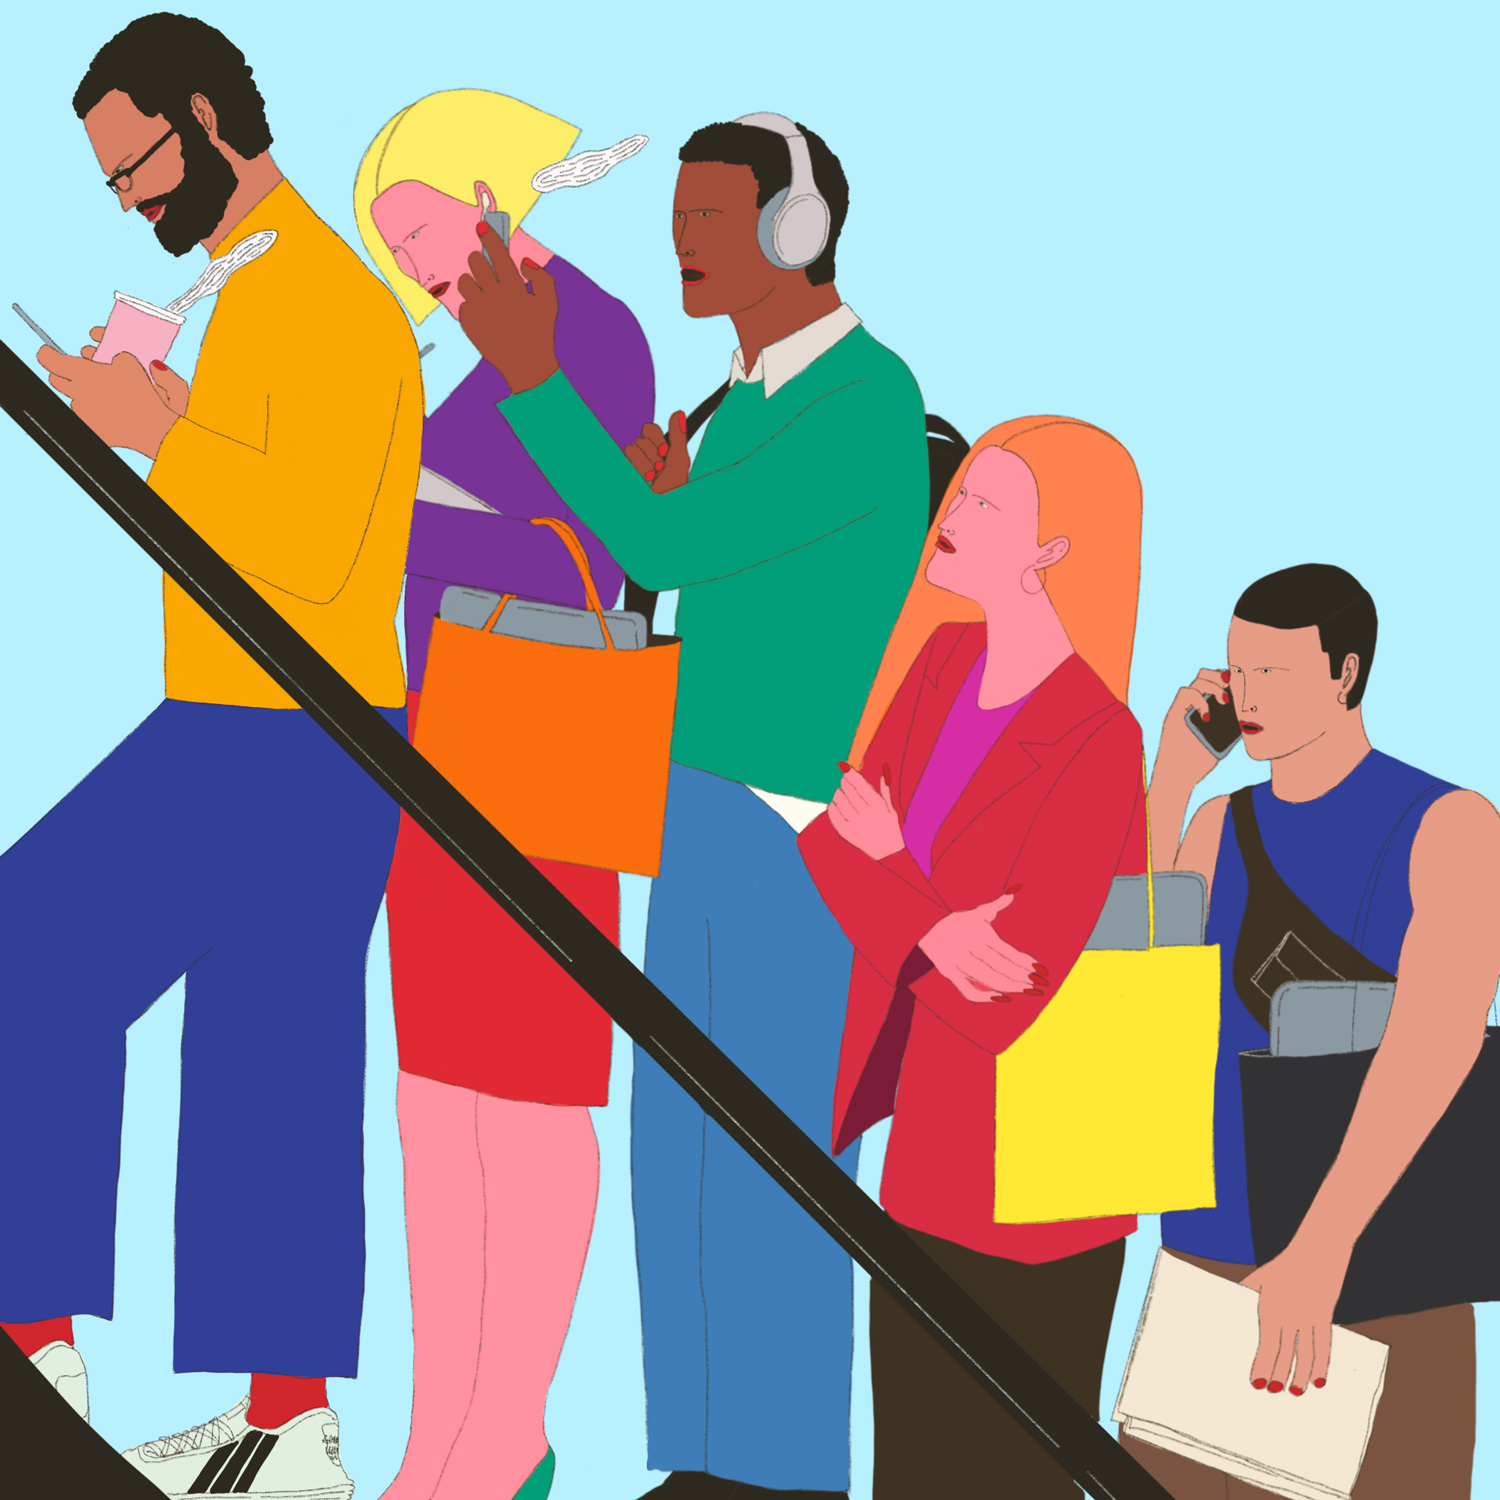 An illustration of people on an escalator going up